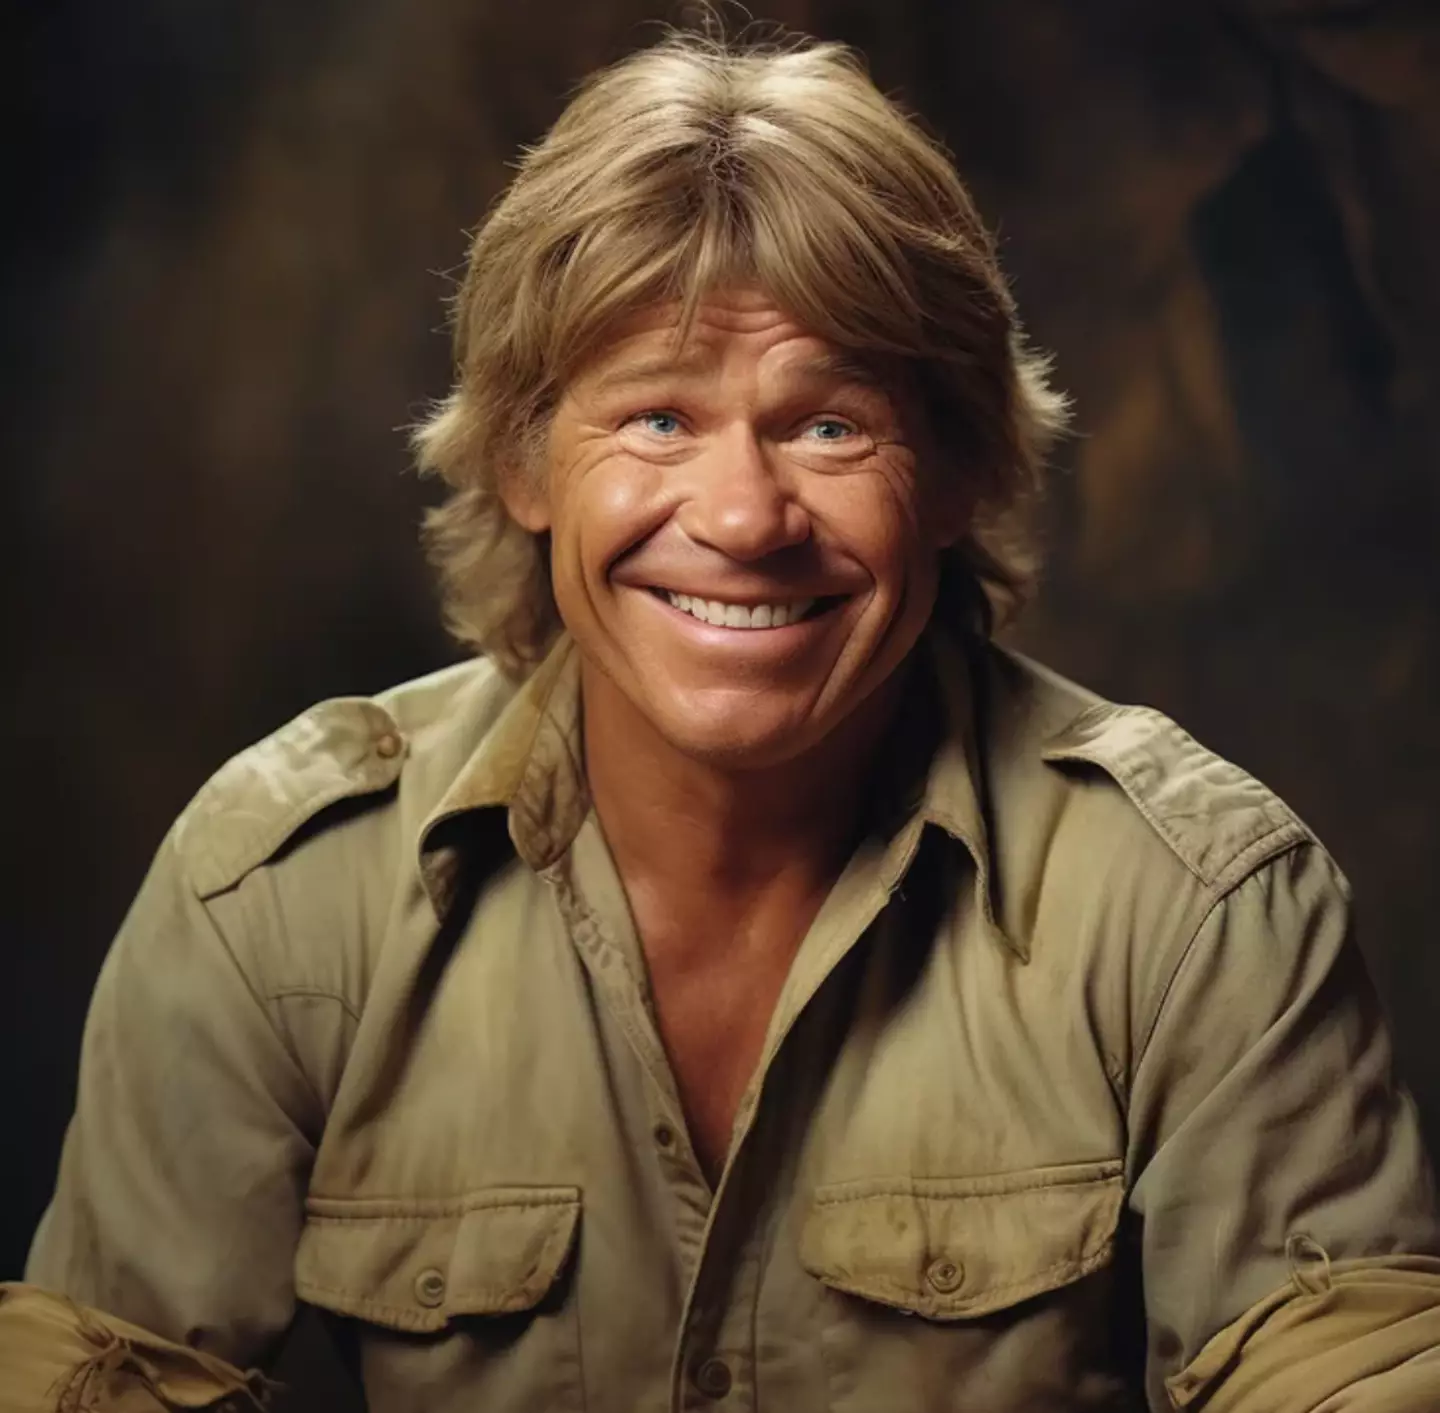 At least Steve Irwin's outfit is right?